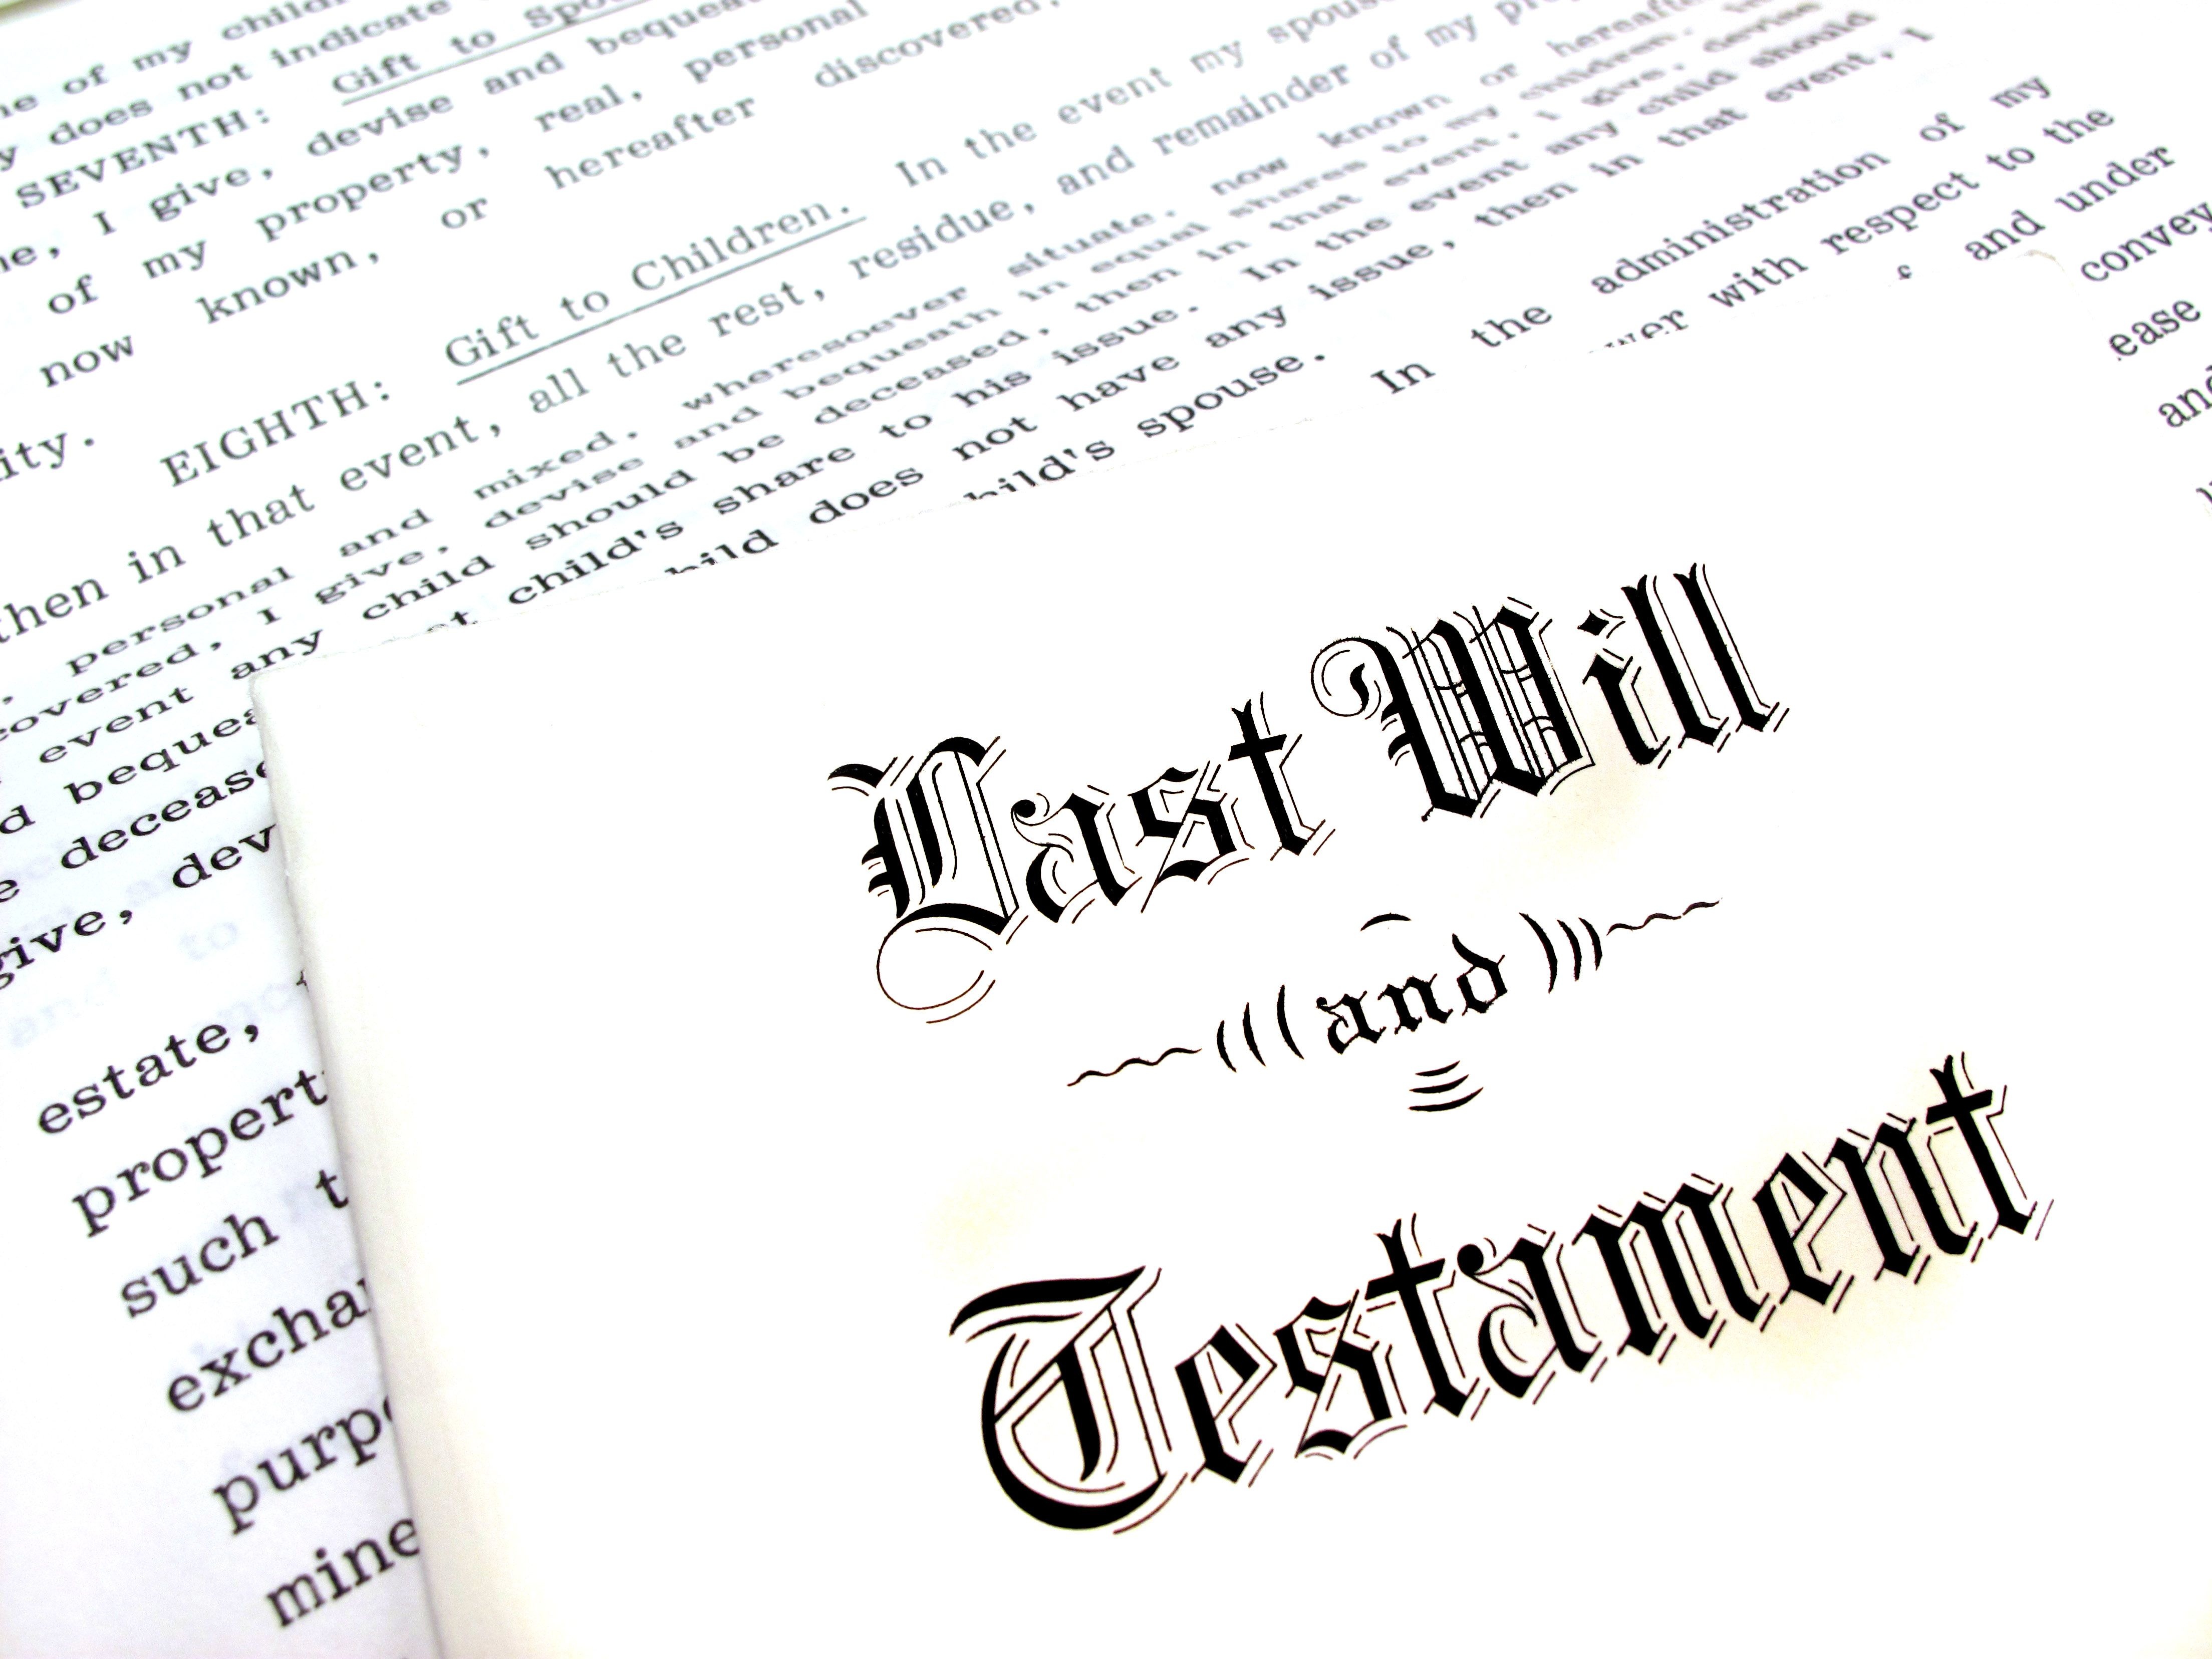 last will and testament